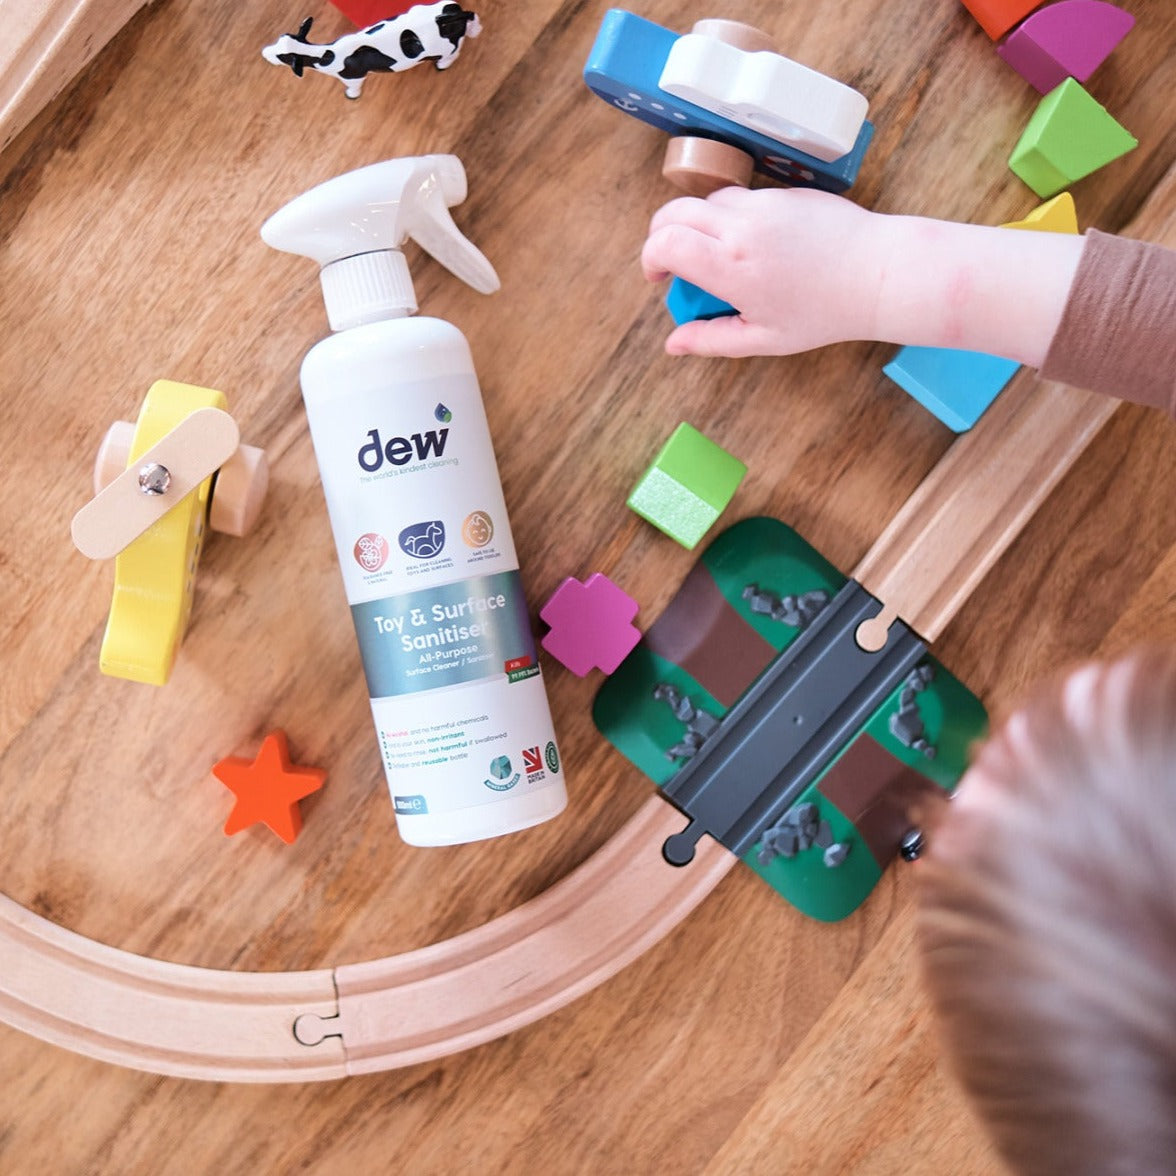 Dew: Disinfected measure for toys and other surfaces of children 500 ml